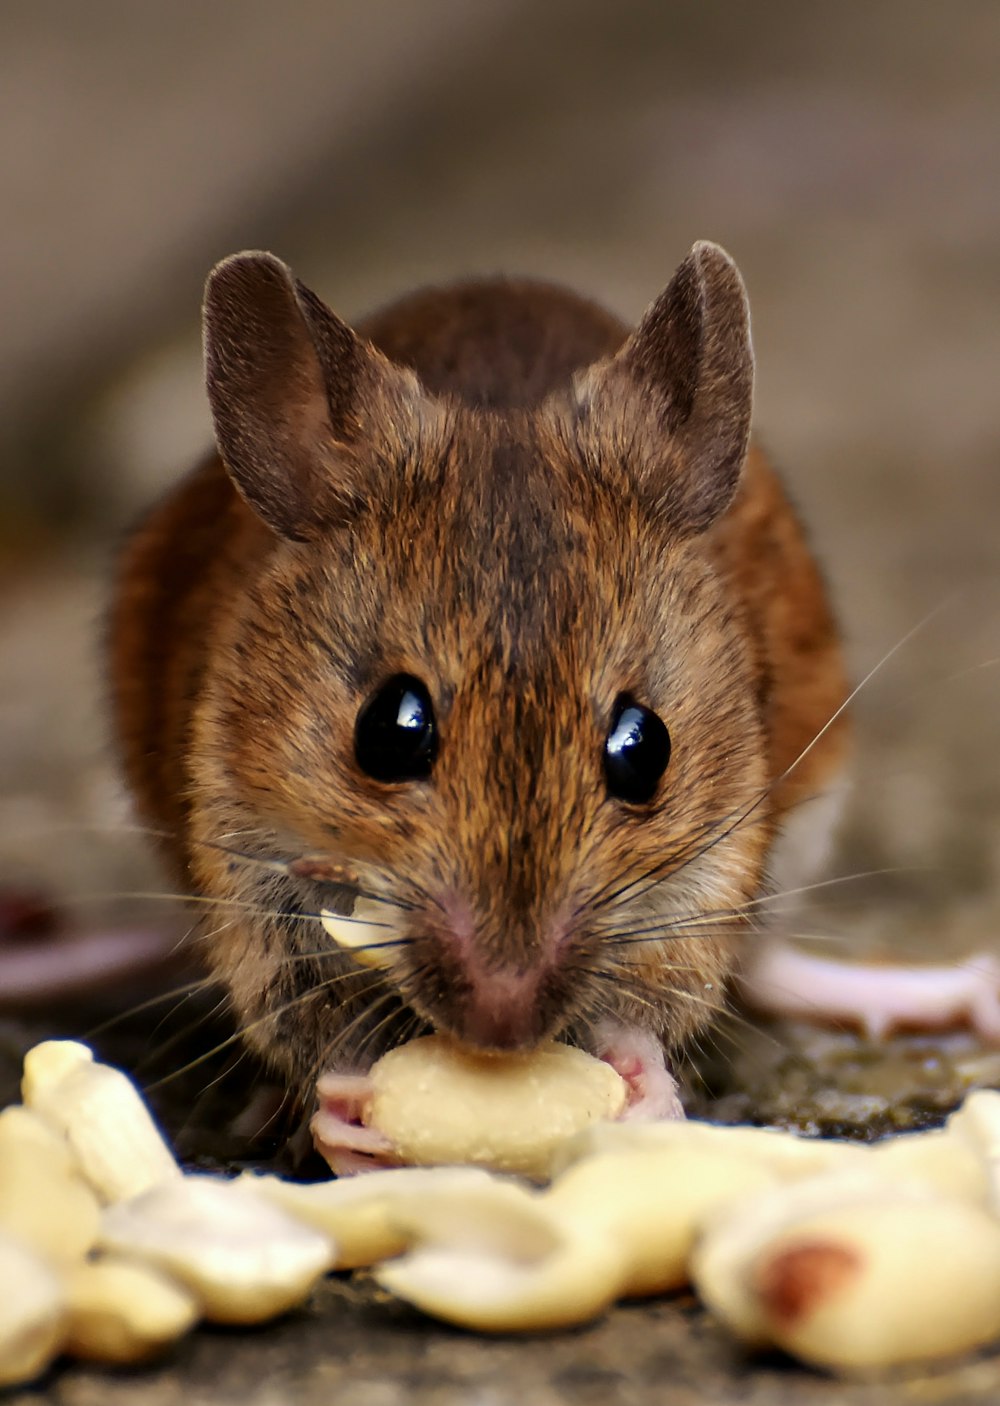 brown rodent eating yellow fruit